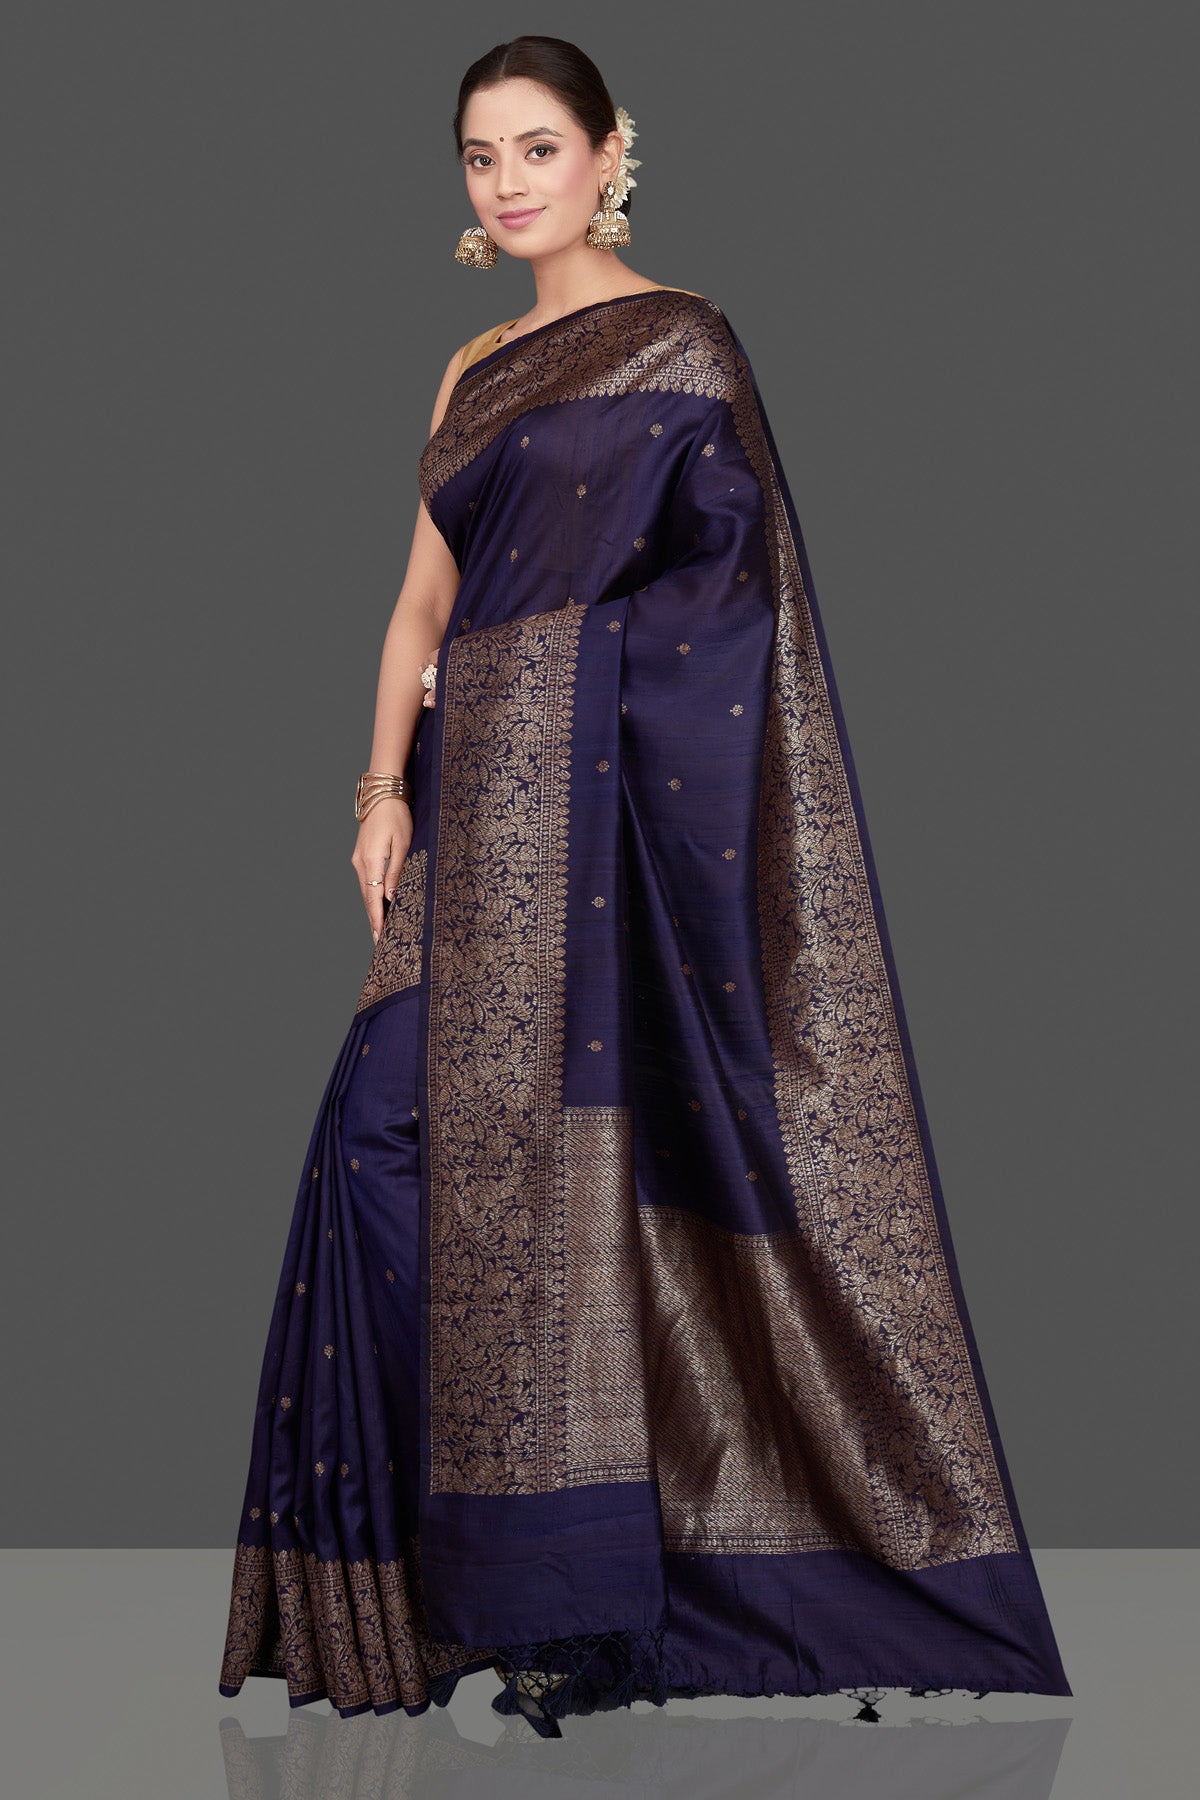 Buy beautiful navy tussar Banarasi saree online in USA with antique zari border. Go for stunning Indian designer sarees, georgette sarees, handwoven saris, embroidered sarees for festive occasions and weddings from Pure Elegance Indian clothing store in USA.-pallu